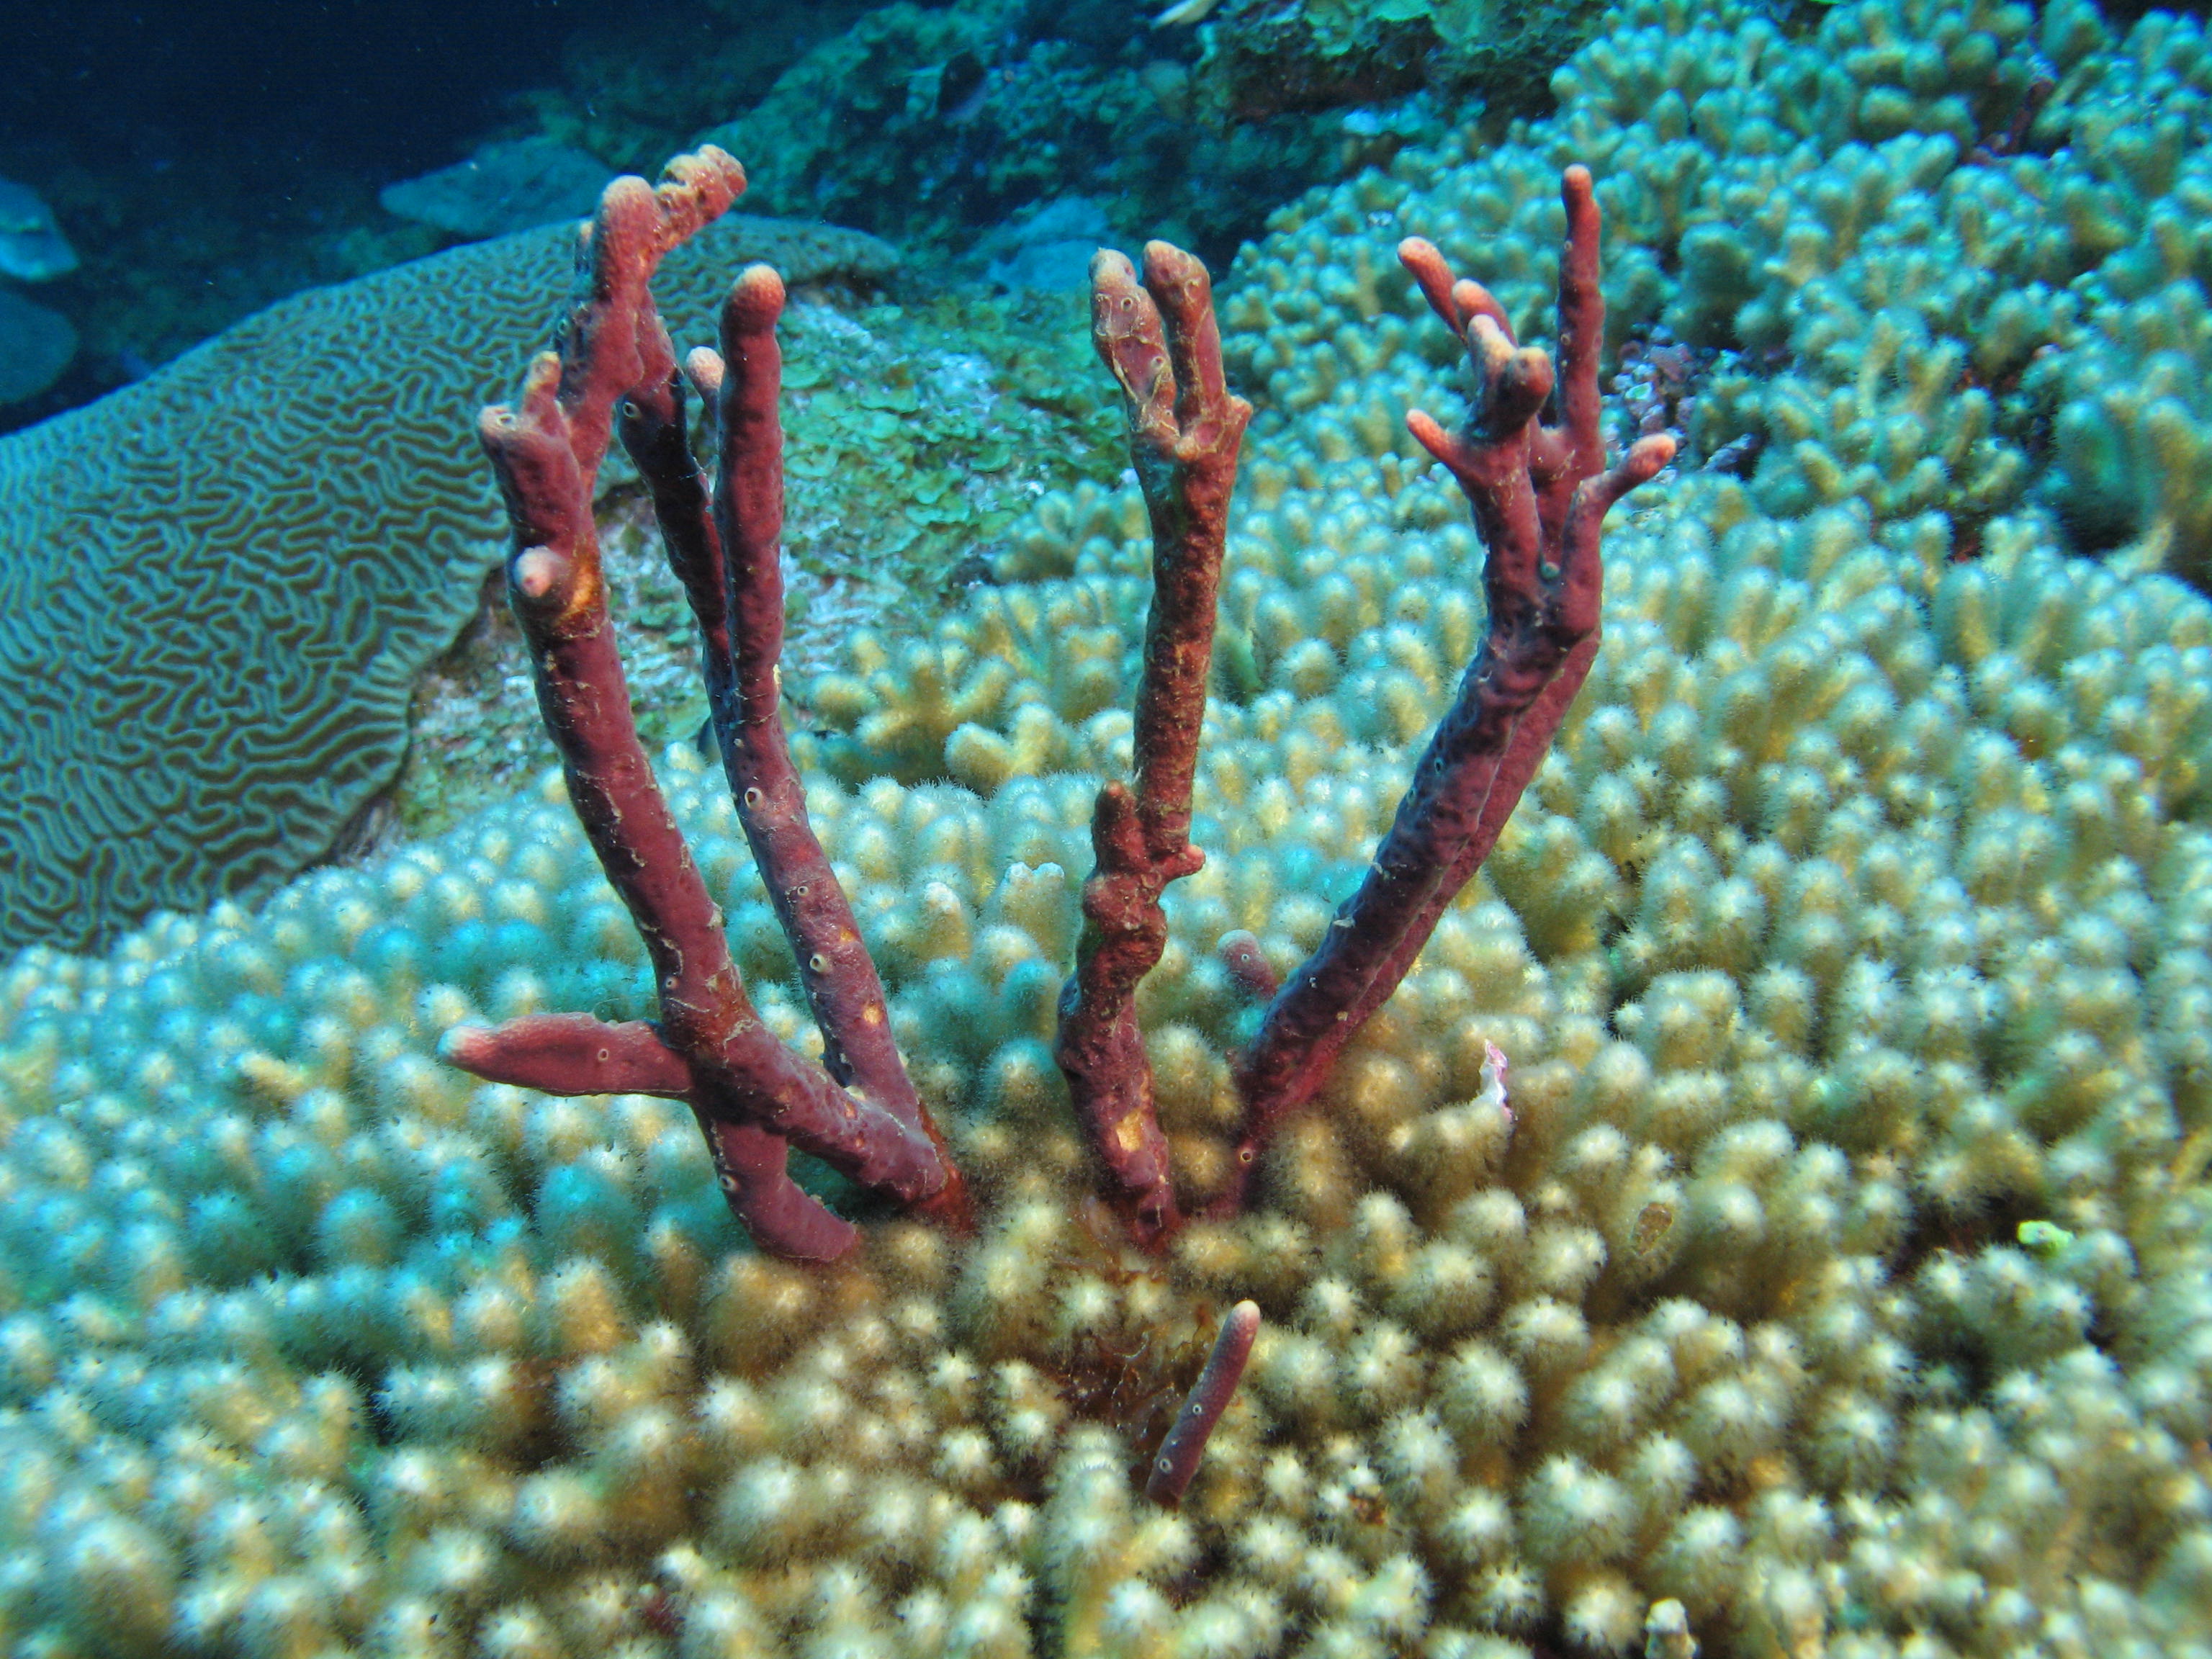 Purple rope sponge growing in a field of yellow pencil coral at the Flower Garden Banks coral reefs, 100 miles offshore in the Gulf of Mexico.